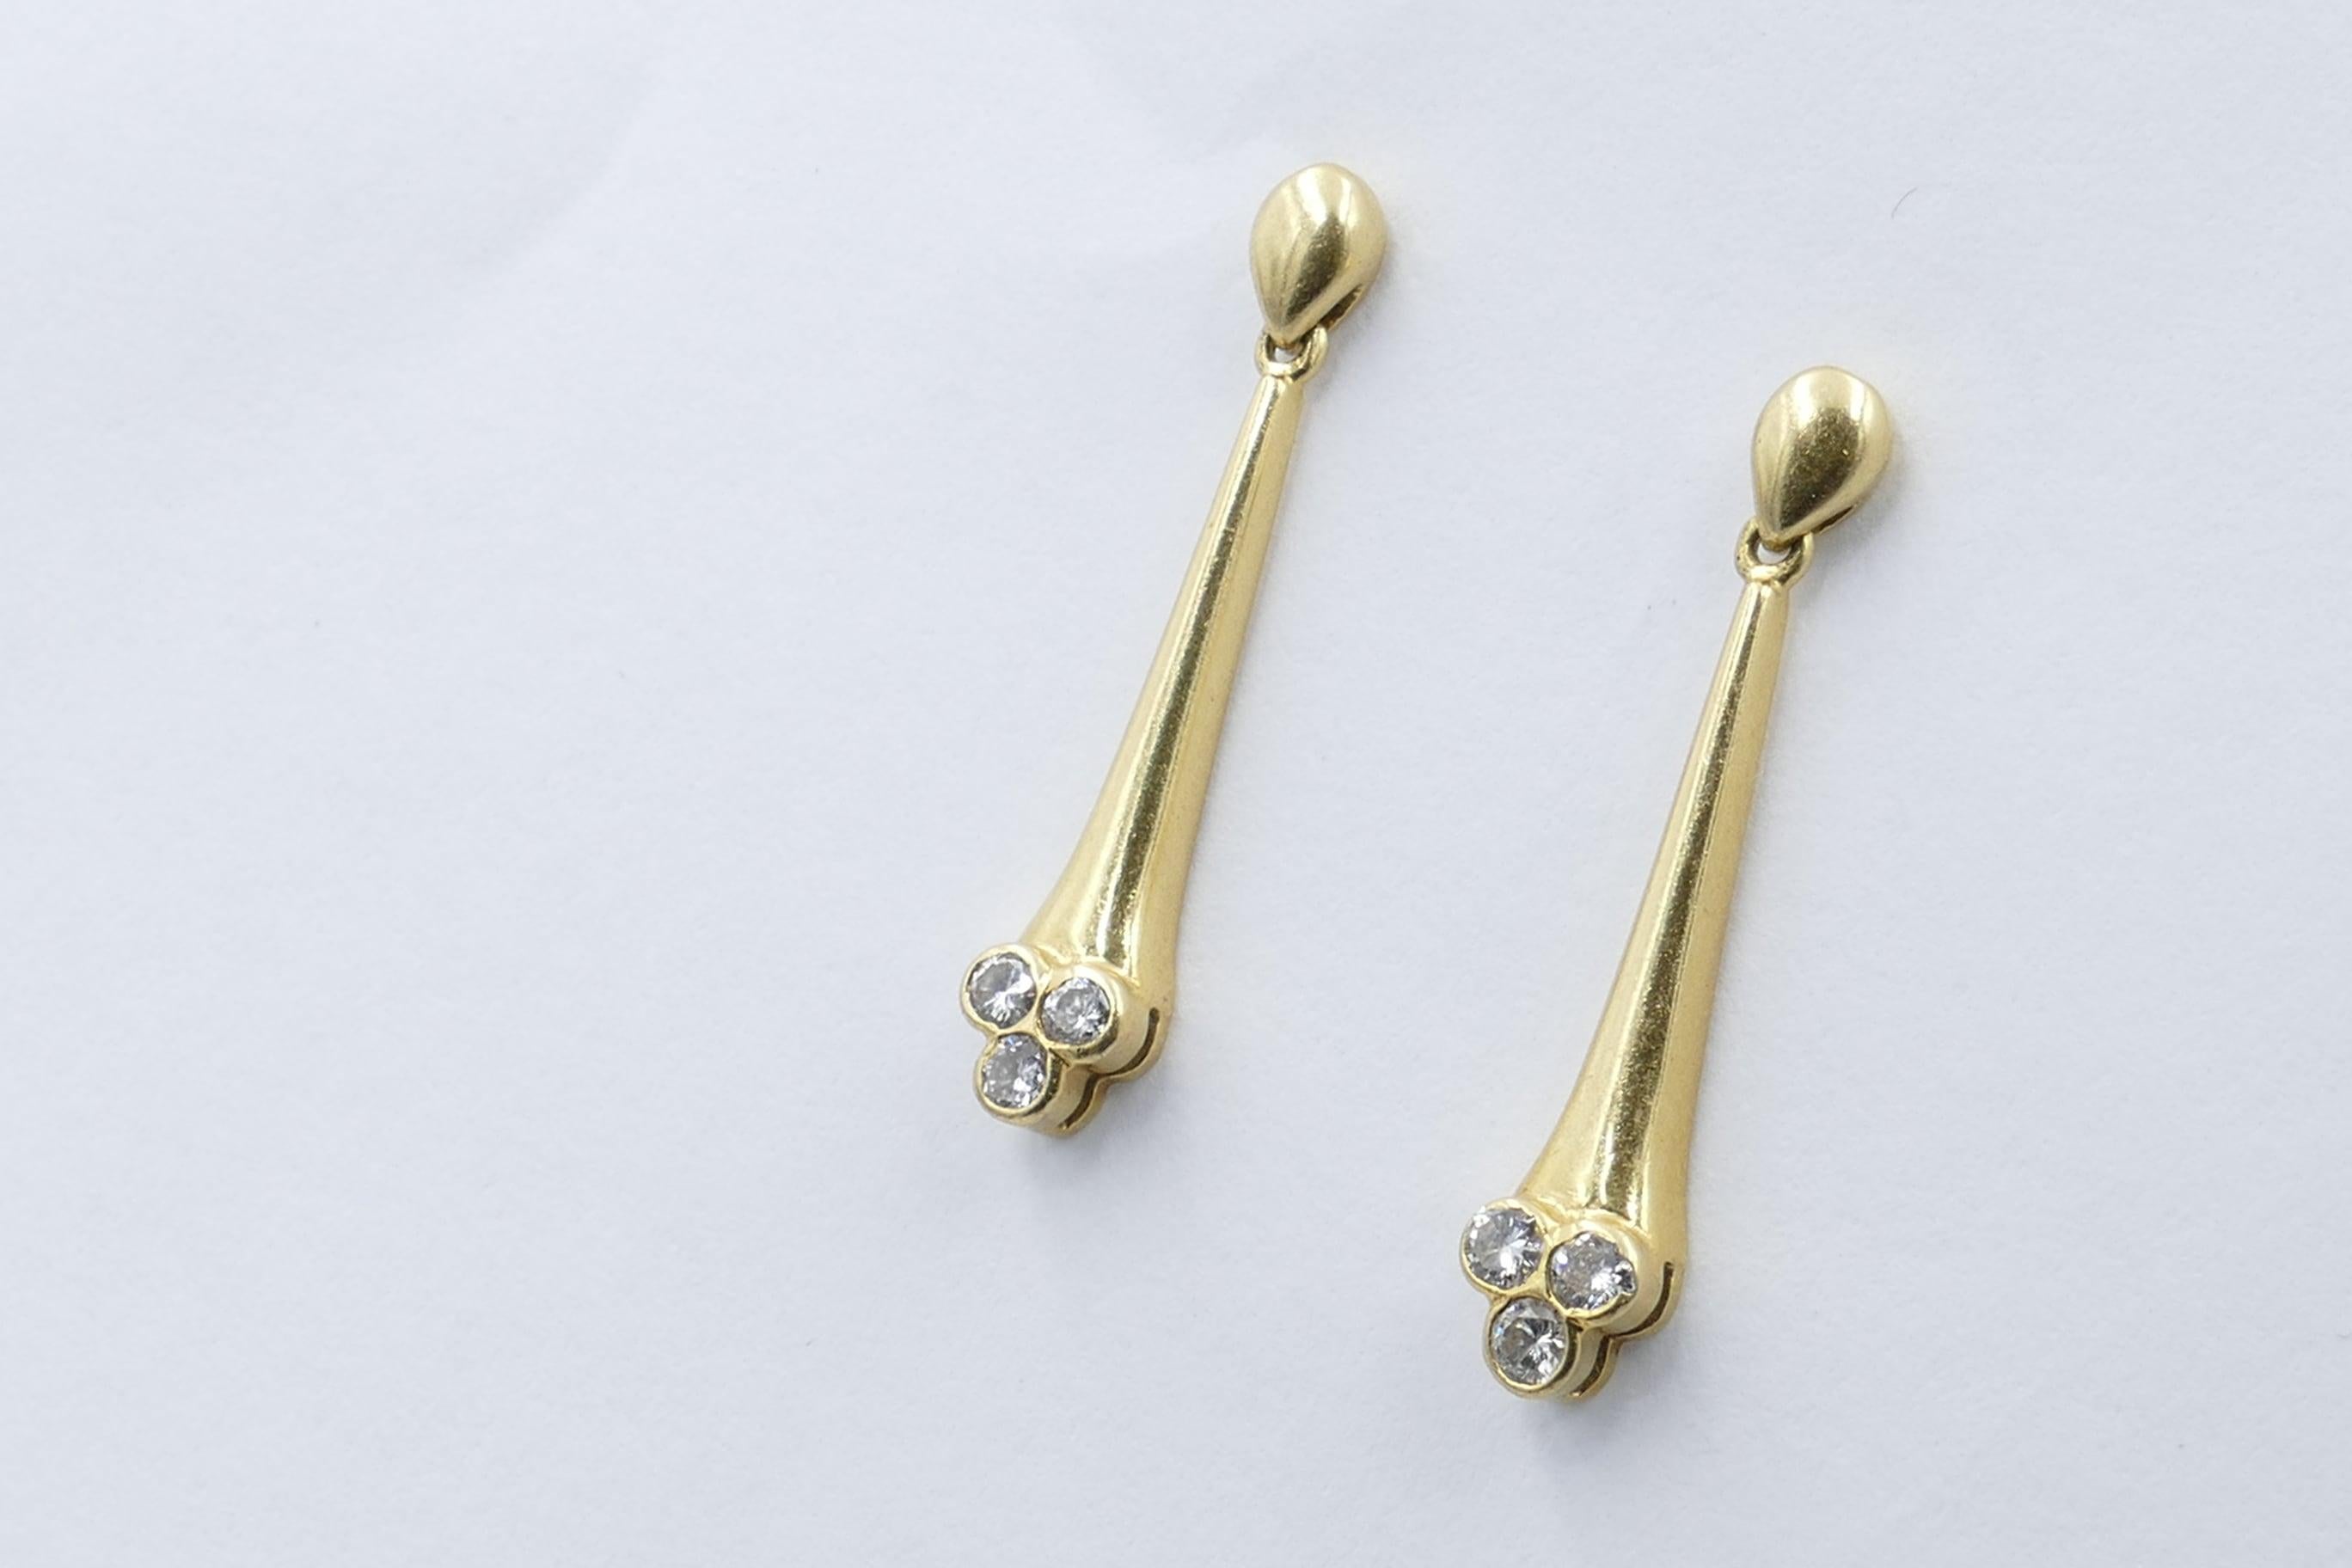 In excellent condition are these very wearable late Victorian earrings fashioned from 18ct yellow Gold with 3 lovely old Diamonds as the feature. Measurement approximately 3/4 cms in length.
The Diamonds are 6 in number G/H colour, SI clarity and